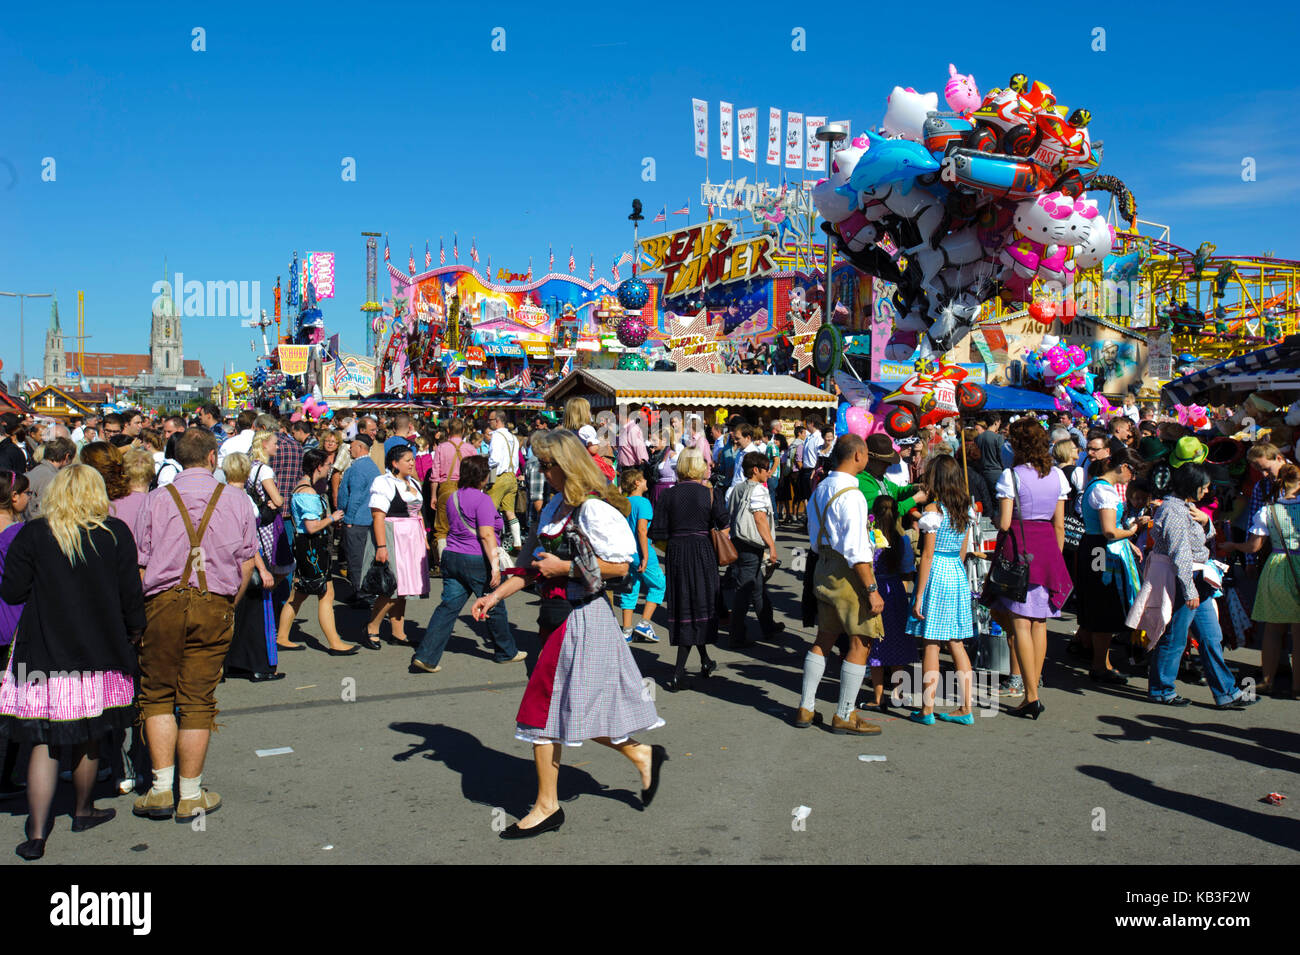 Oktoberfest in Munich, visitor on the streets in front of the beer tents and amusement rides, Stock Photo